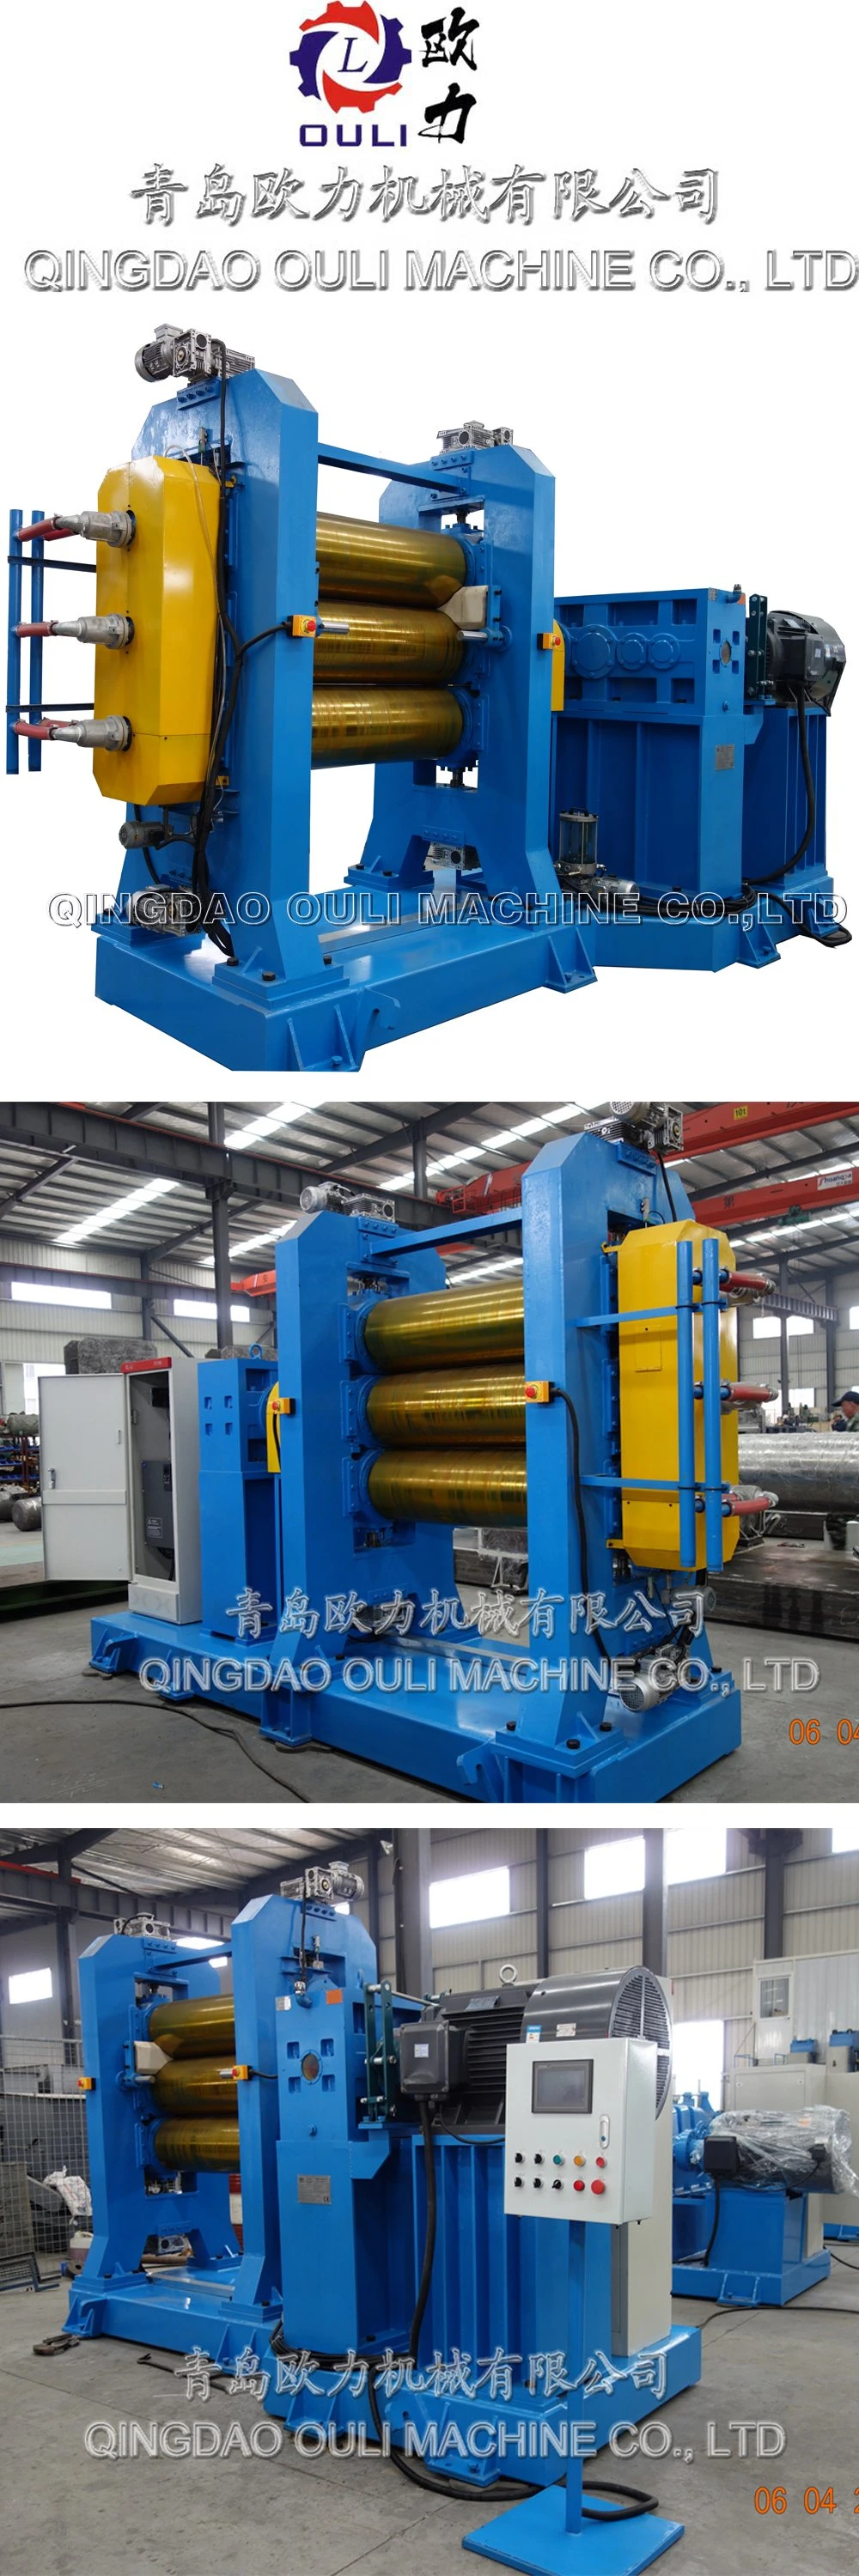 High Accuracy Calendering Mill for Rubber/Plastic 3-Roll Calender Machine